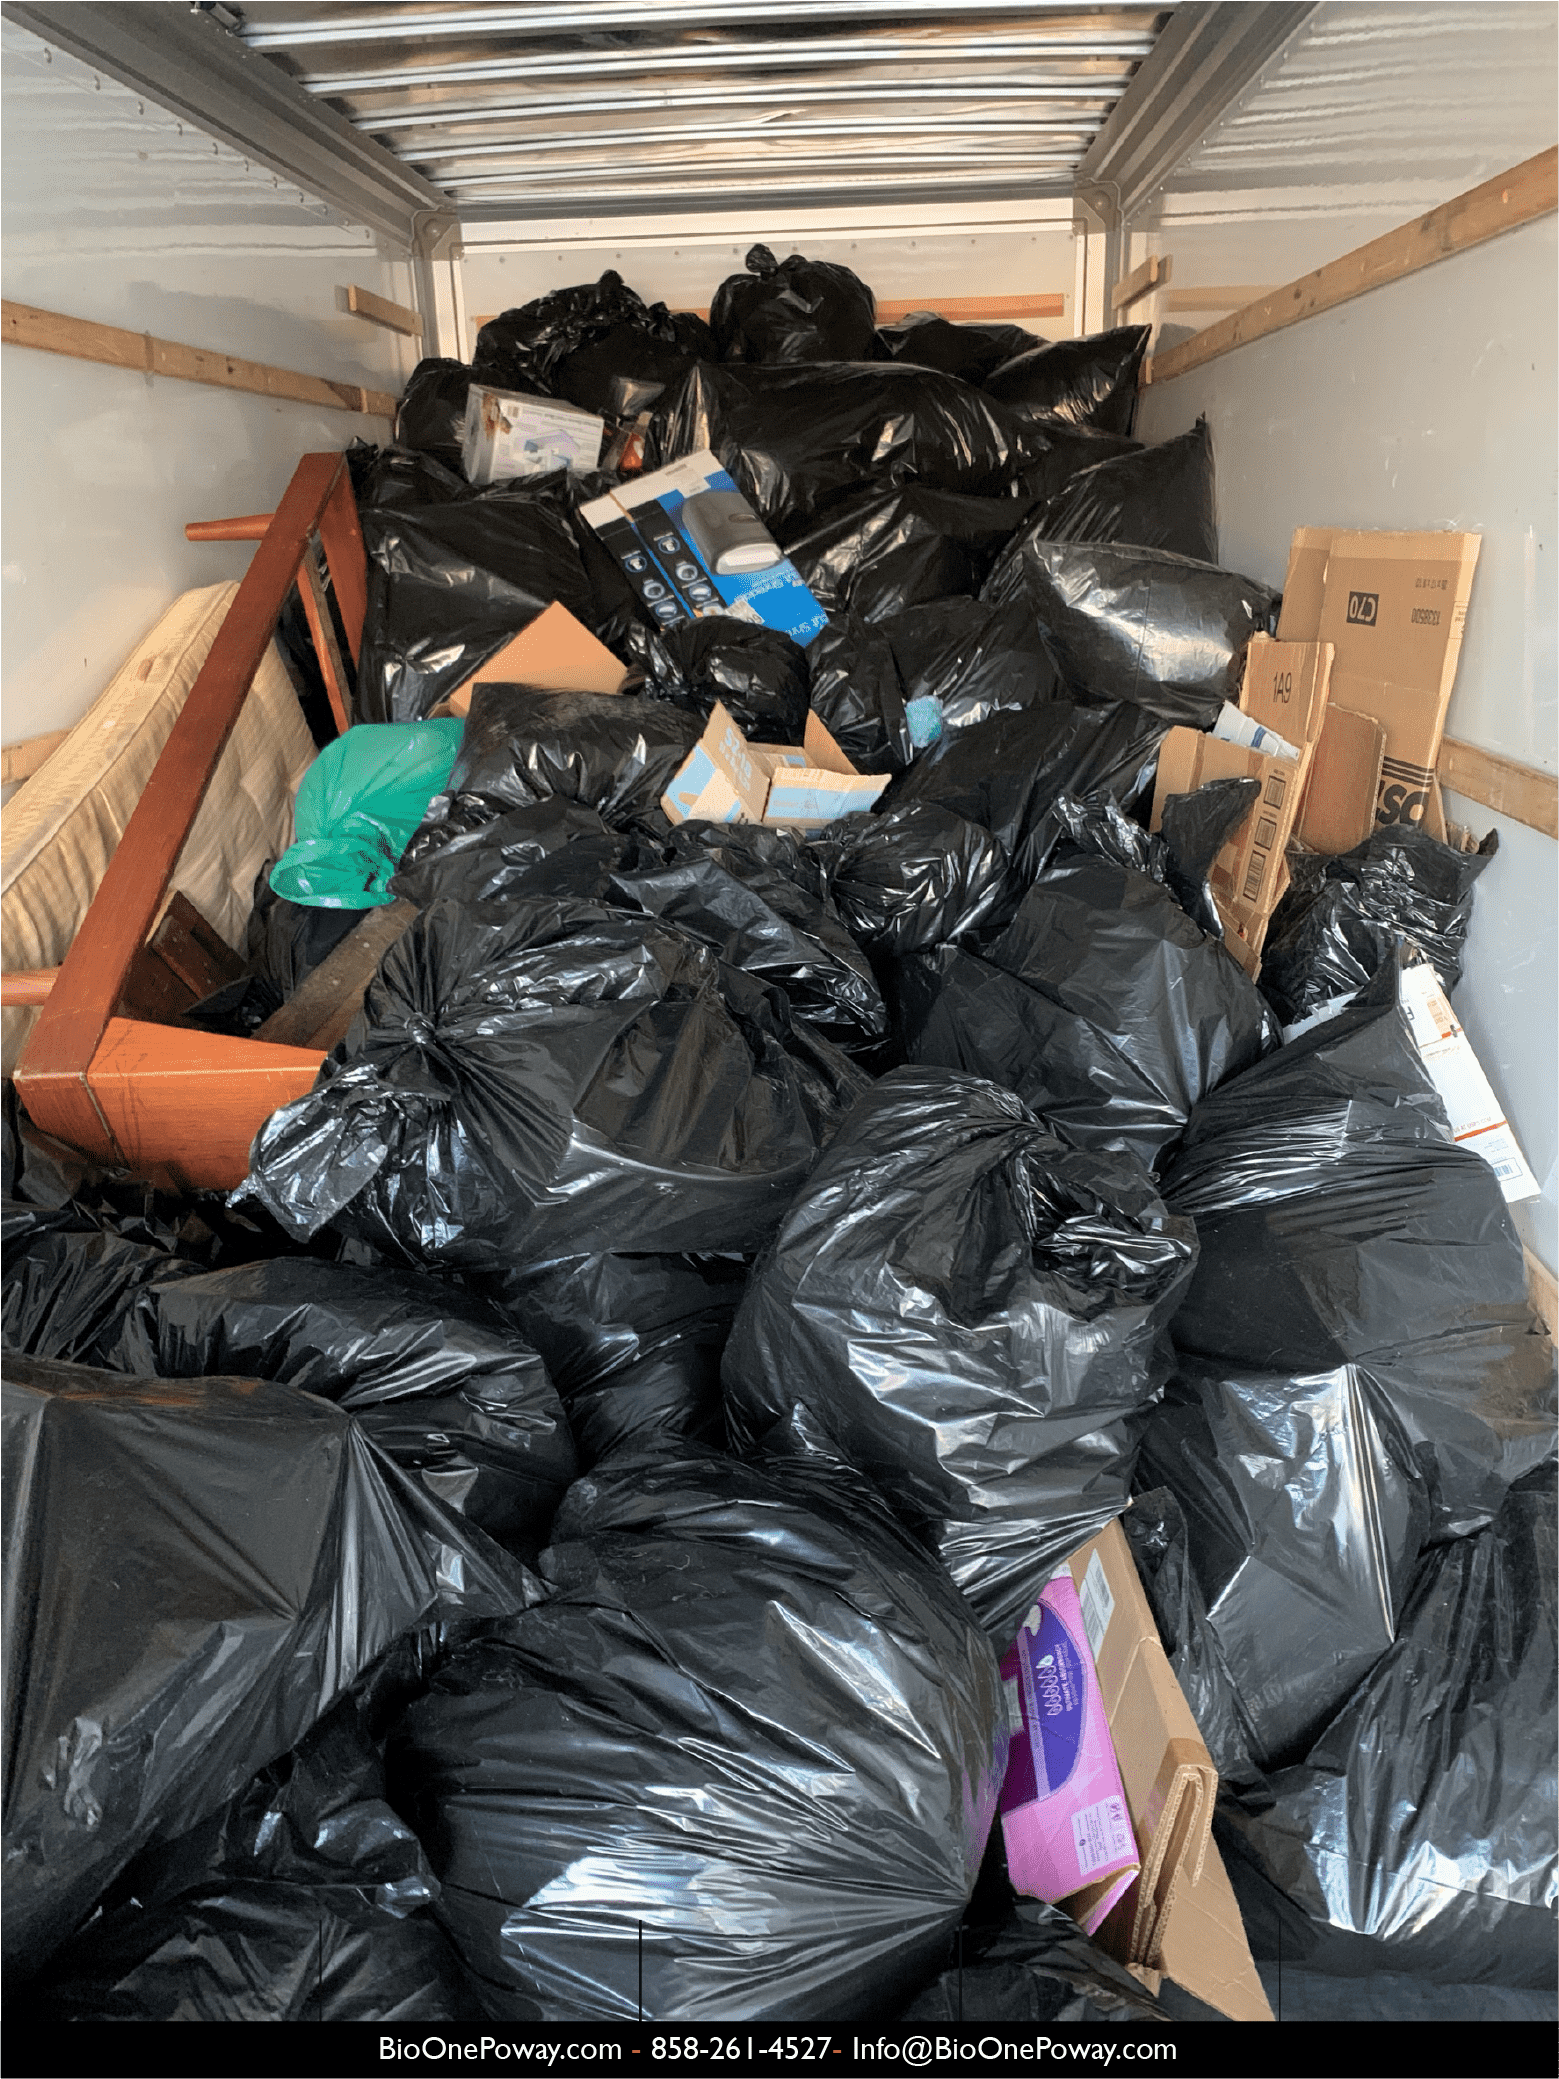 Image shows bags of trash, furniture, cartonboard, and other debris removed by Bio-One technicians from a hoarded property.